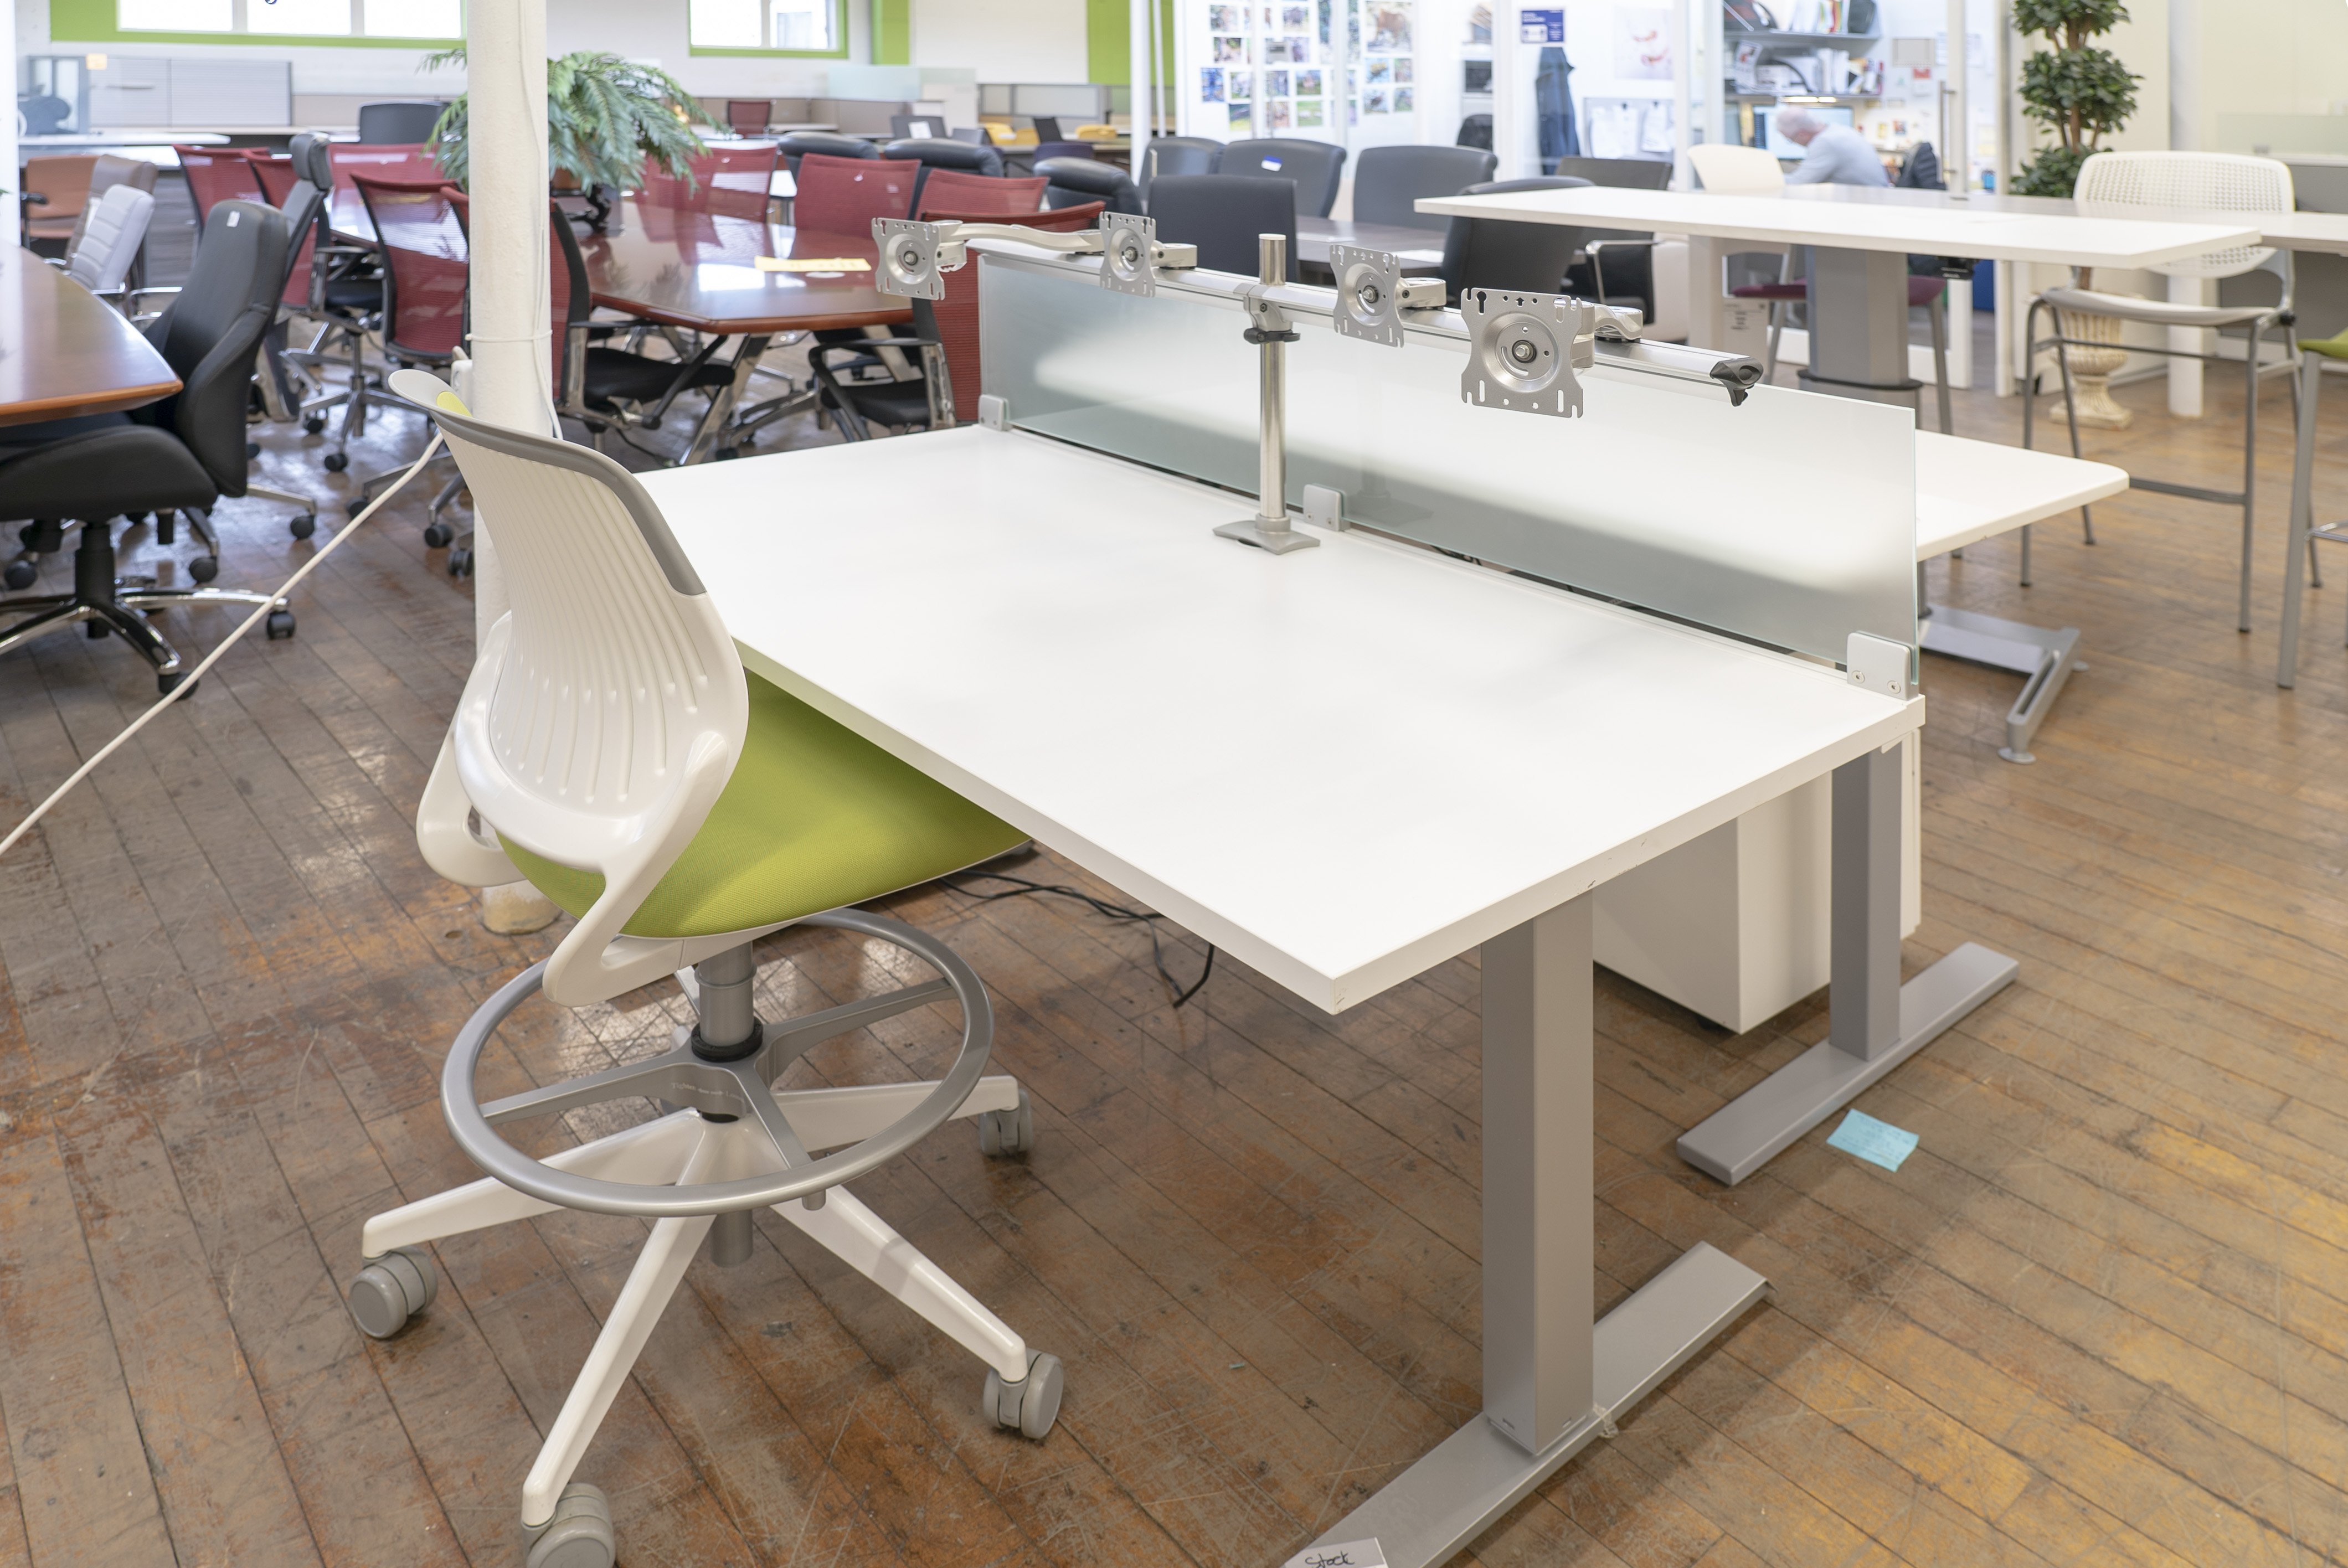 Peartree Height Adjustable Sit-to-Stand Desks with Frosted Glass Screen